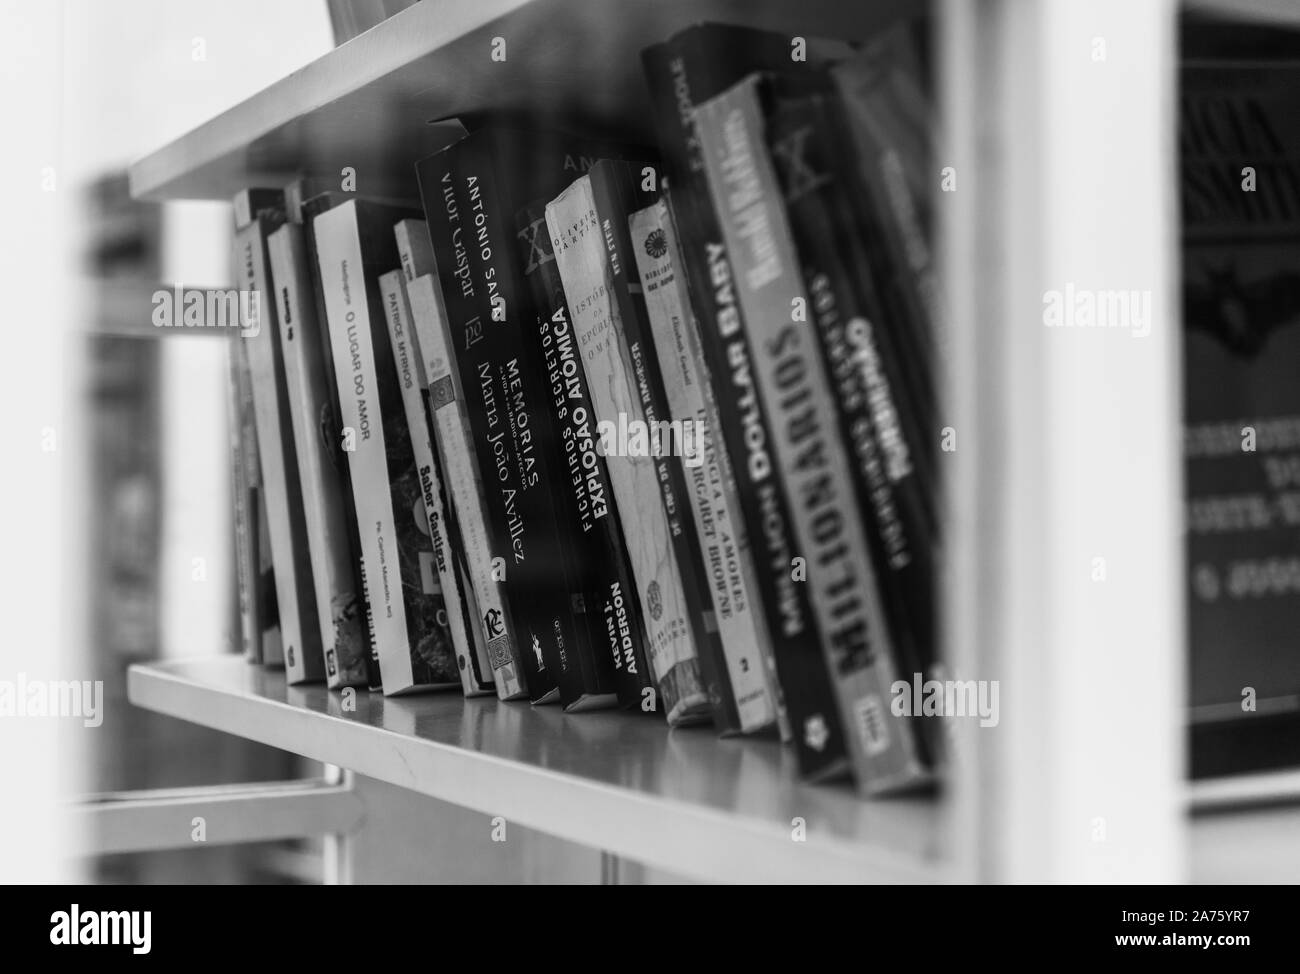 A black and white picture of a group of books sitting on a shelf inside a phone booth. Stock Photo